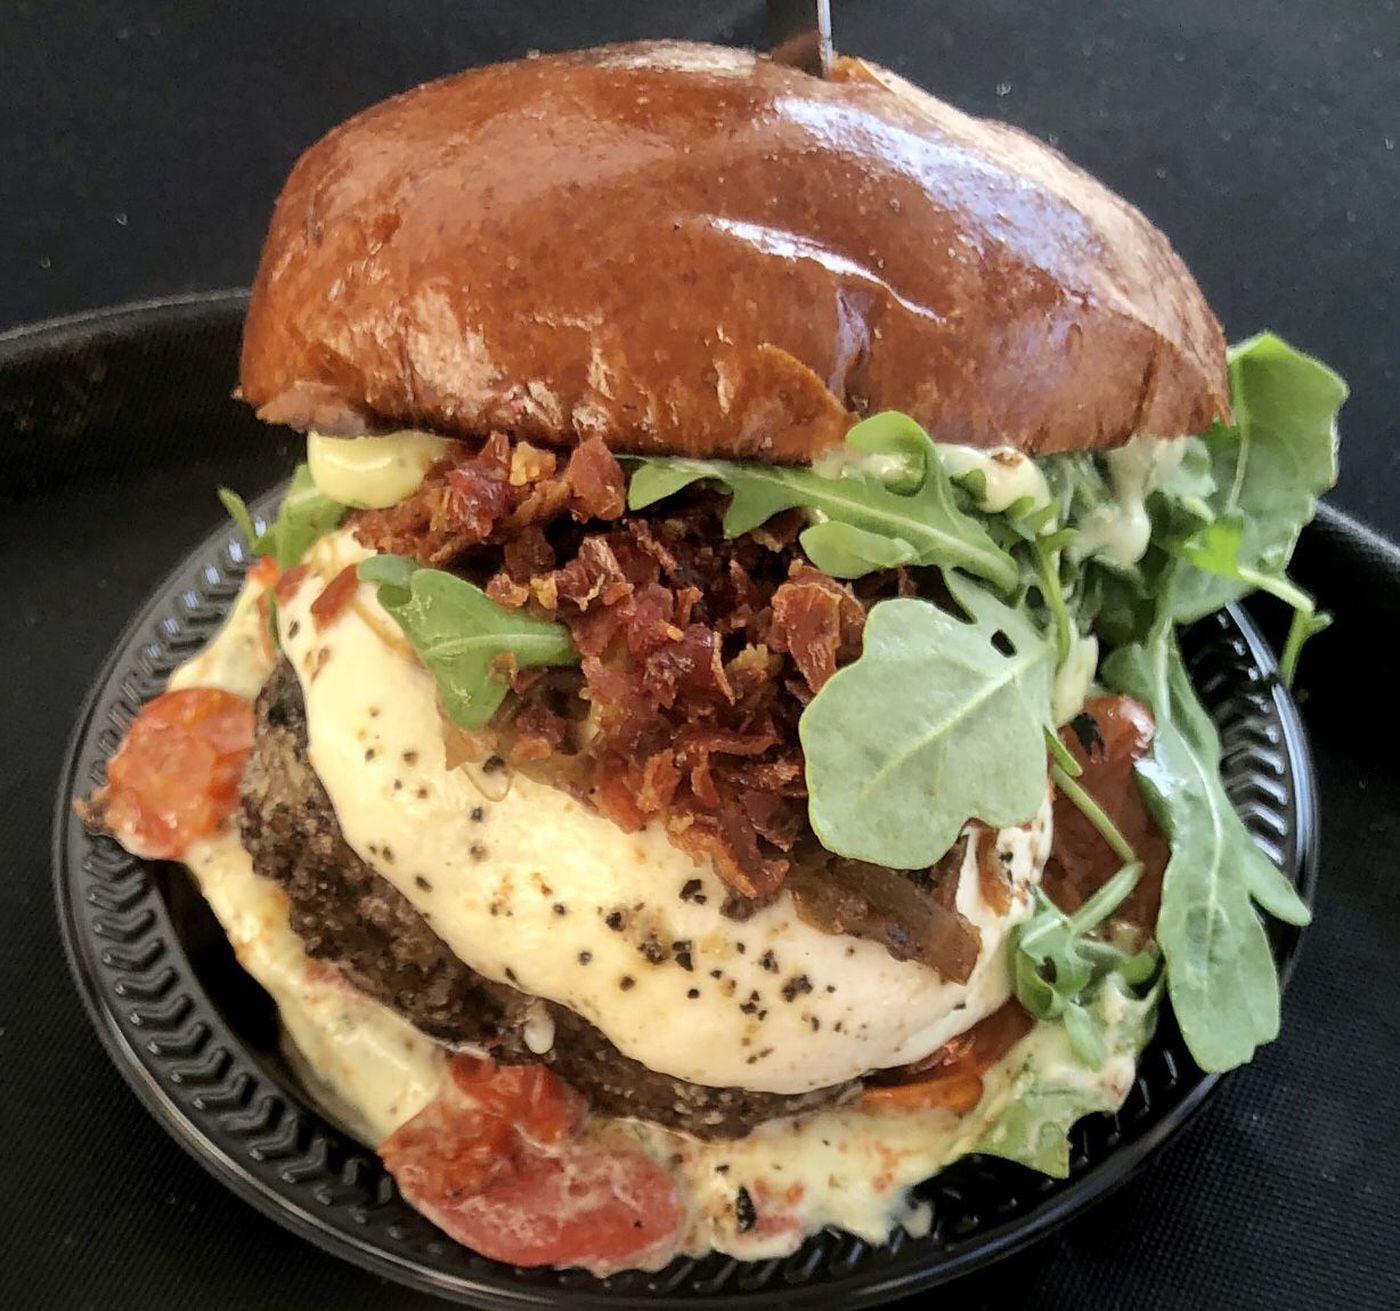 The Pennsport from Moonshine was topped with crispy prosciutto, mozzarella, caramelized onions, basil aioli, arugula, and tomato jam on a garlic-toasted bun.